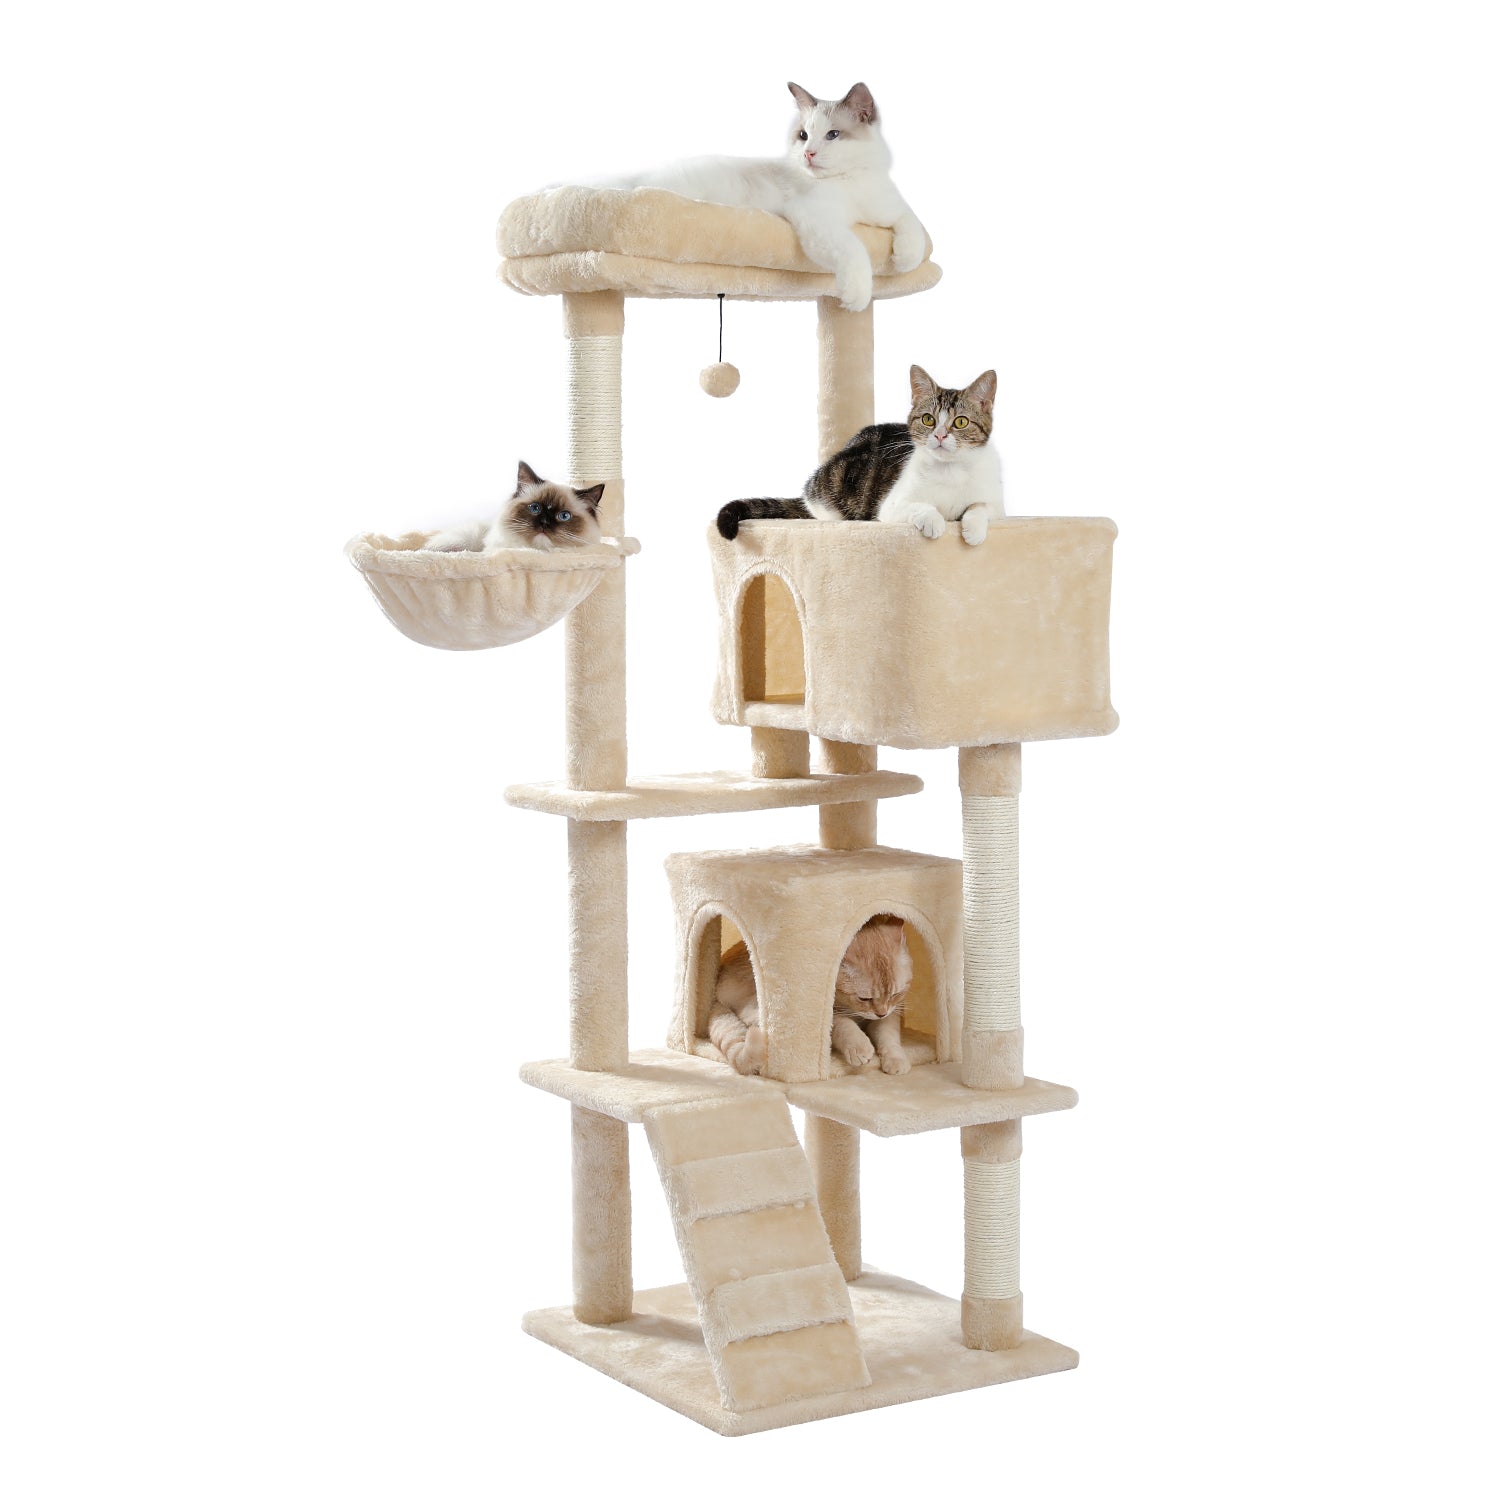 Multi-functional Cat Tree Tower with Sisal Scratching Post, 2 Cozy Condos, Top Perch, Hammock, Climbing ladder and Dangling Ball - TOYSHIP